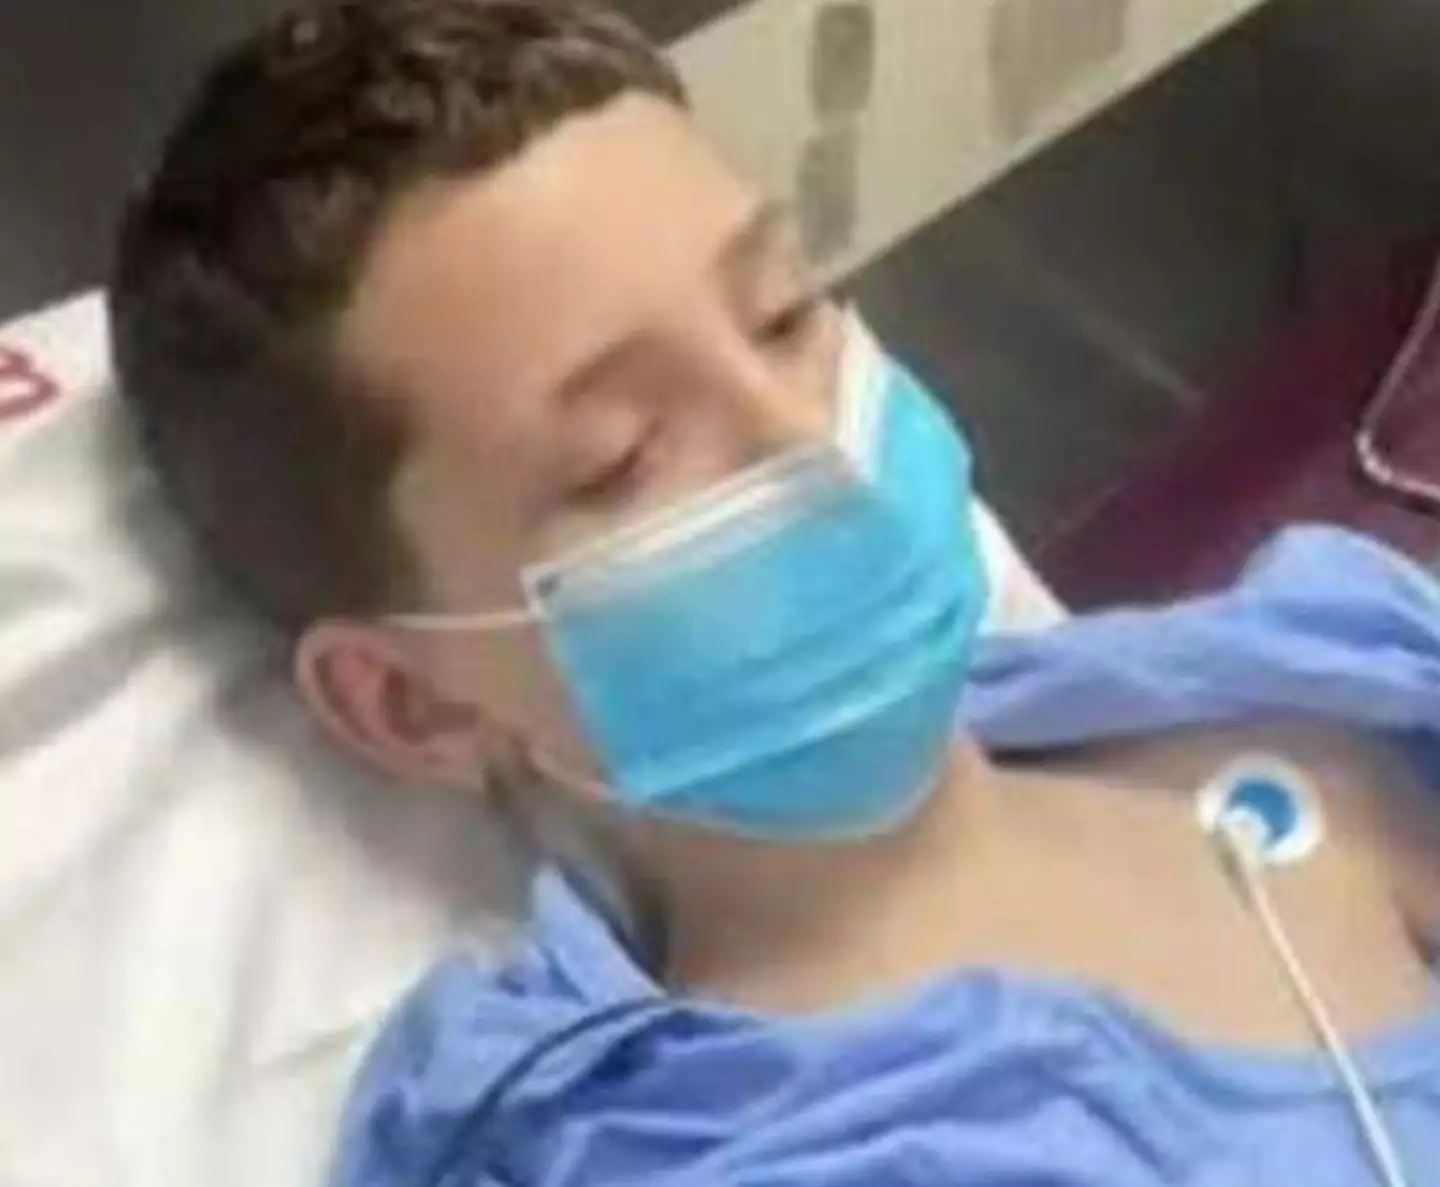 The 12-year-old was later diagnosed with a rare autoimmune condition.